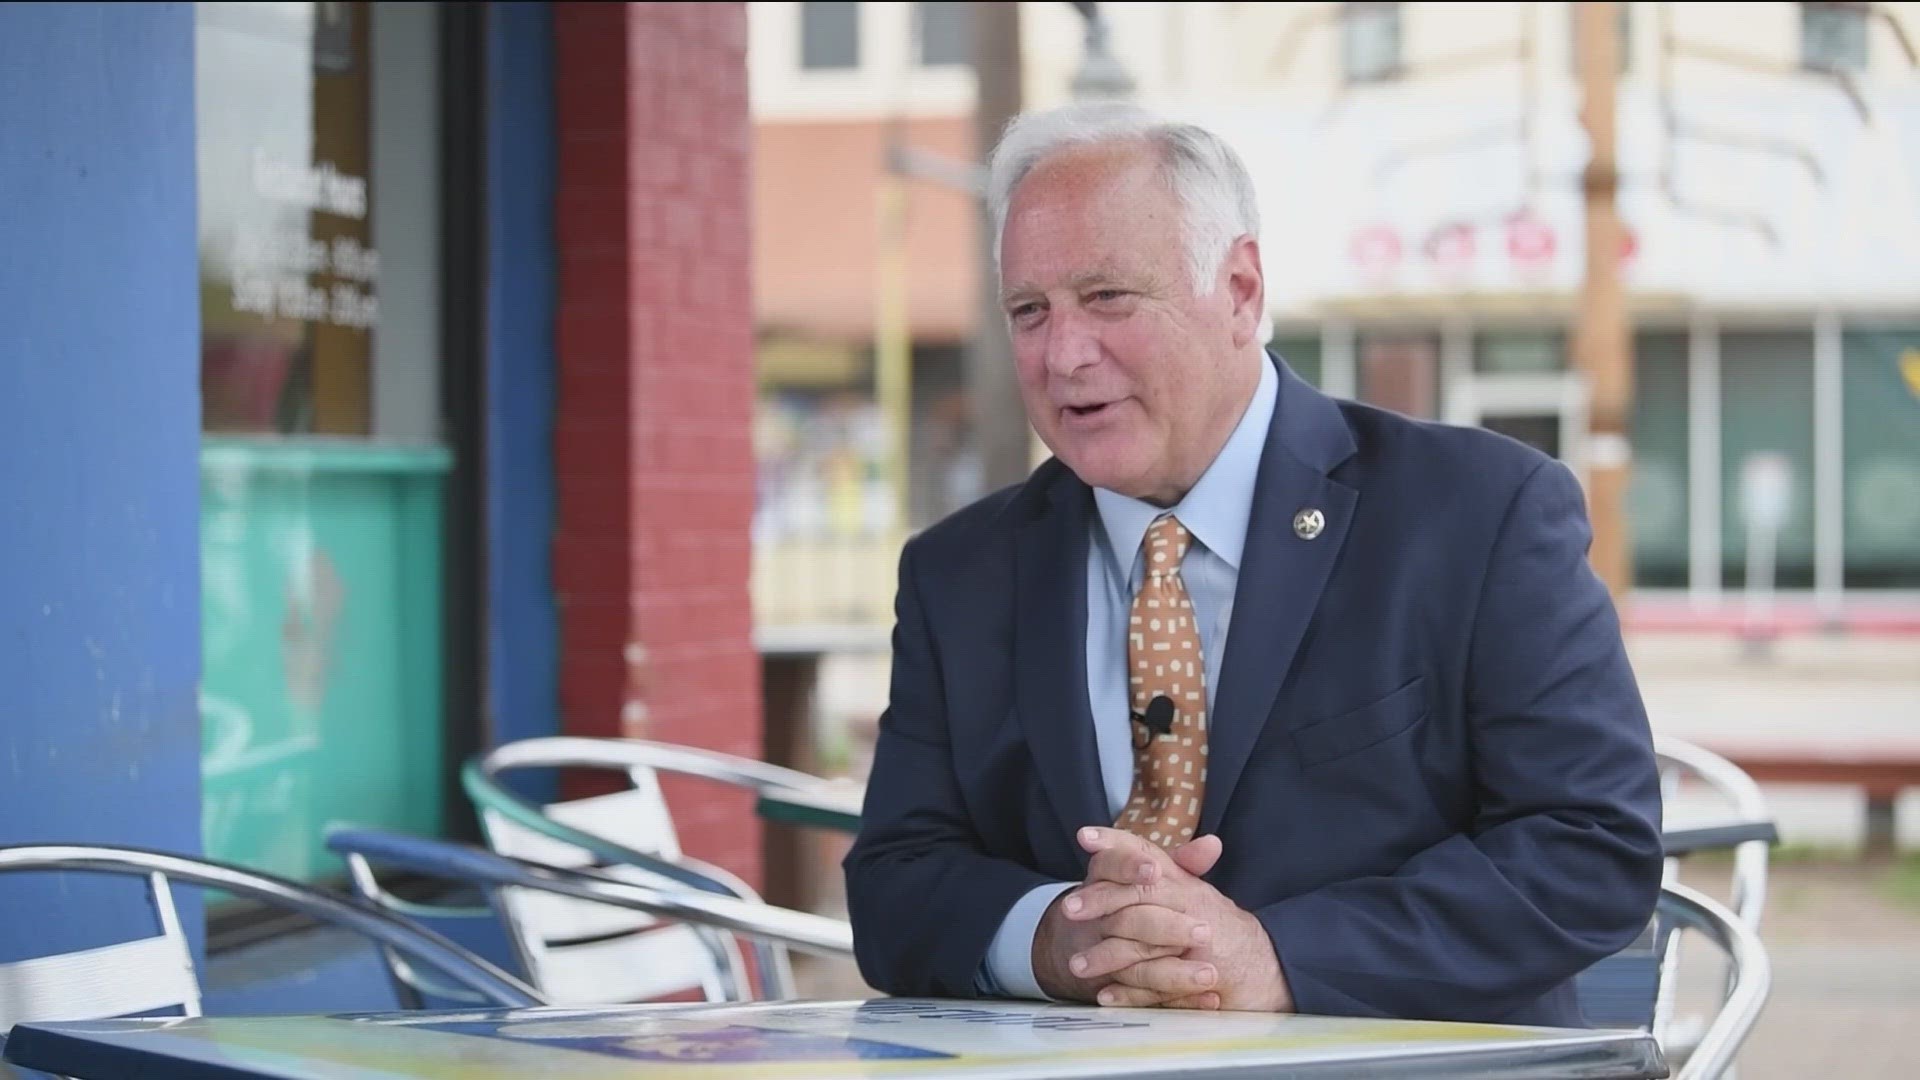 Austin Mayor Kirk Watson is running for re-election. KVUE Political Director Ashley Goudeau sat down with Watson to discuss his decision to run again.